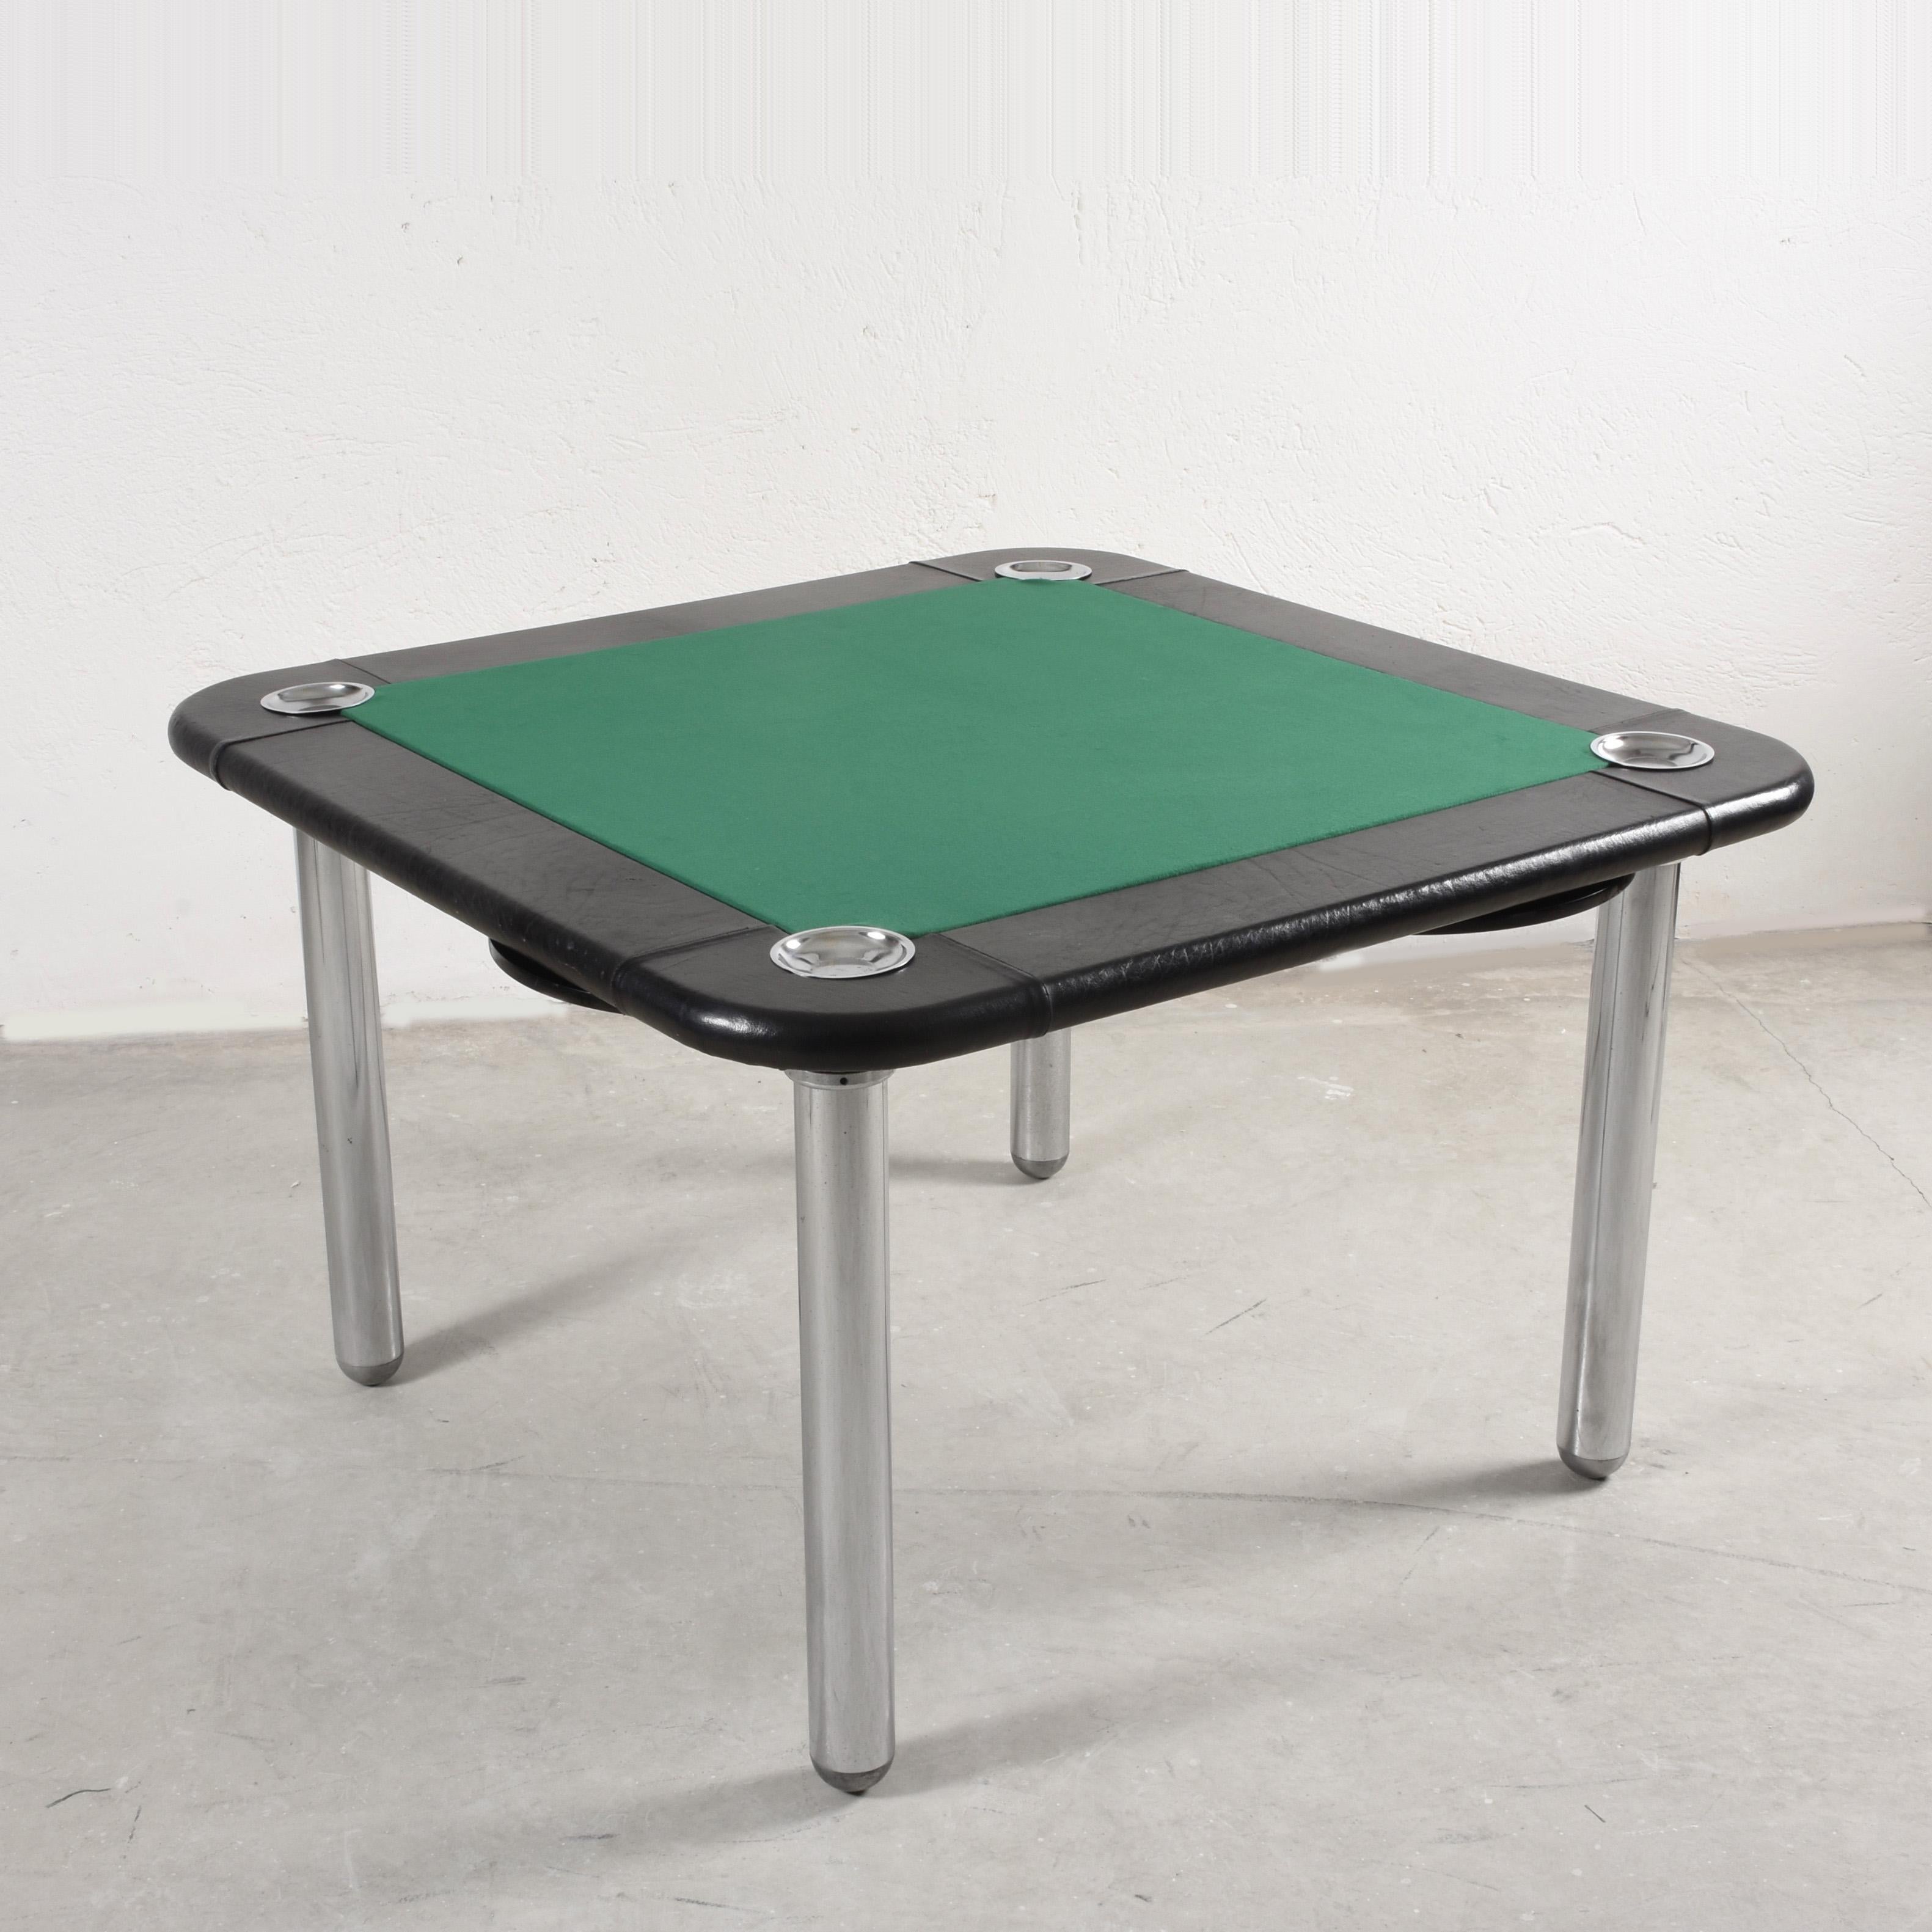 Mid-Century Modern Leather and Chromed Steel Italian Game Table attributed to Zanotta, 1960s For Sale